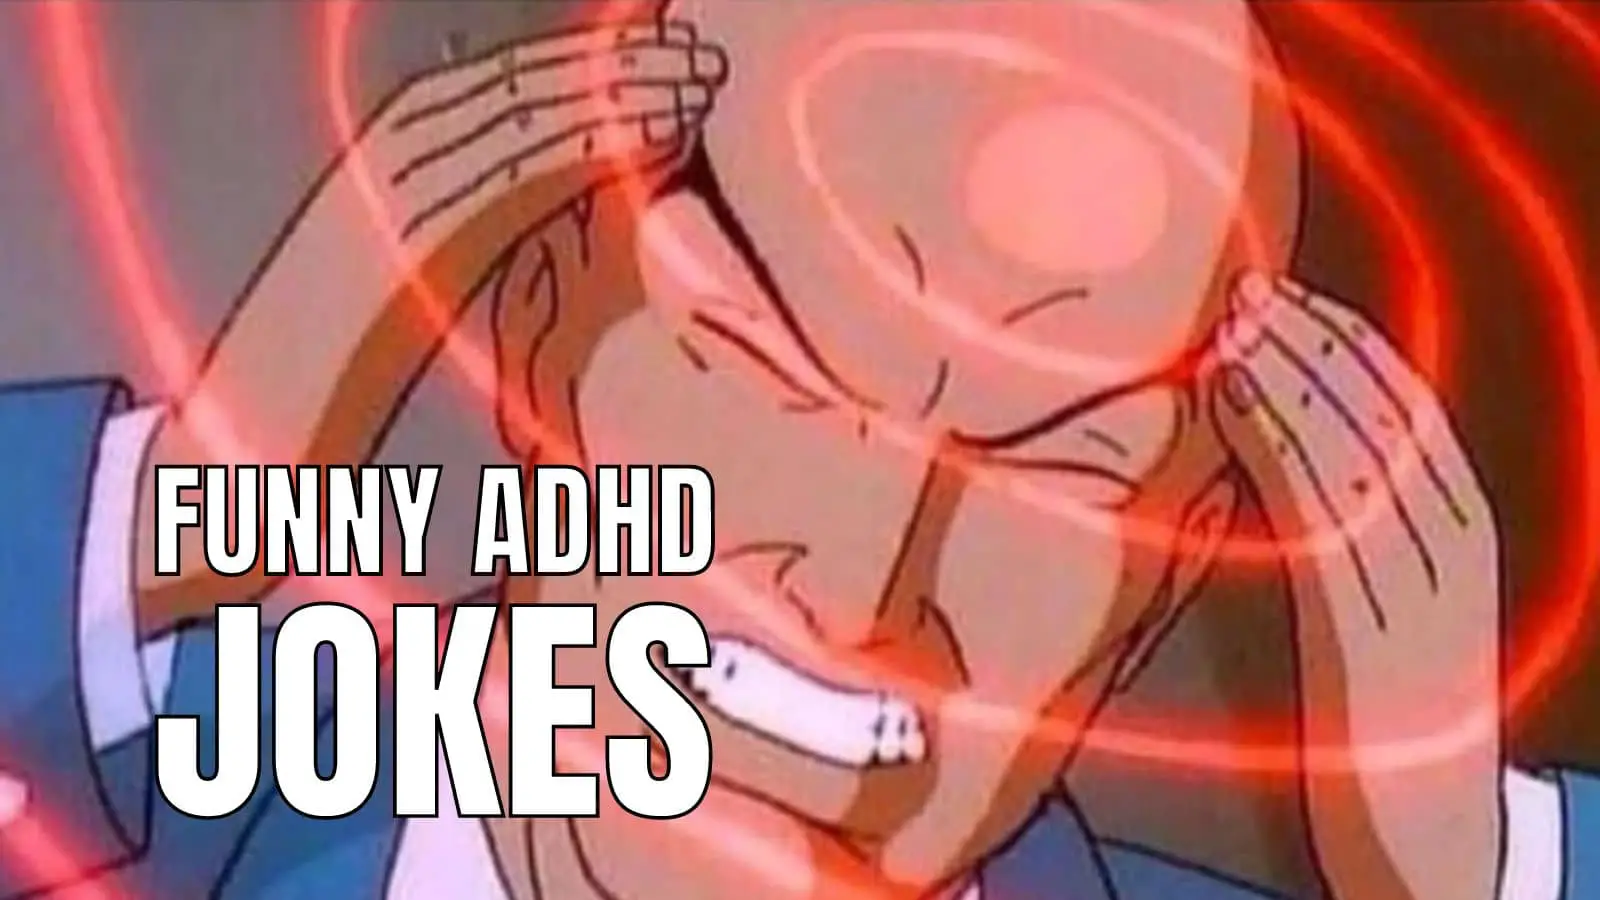 Funny ADHD Jokes On Attention deficit hyperactivity disorder